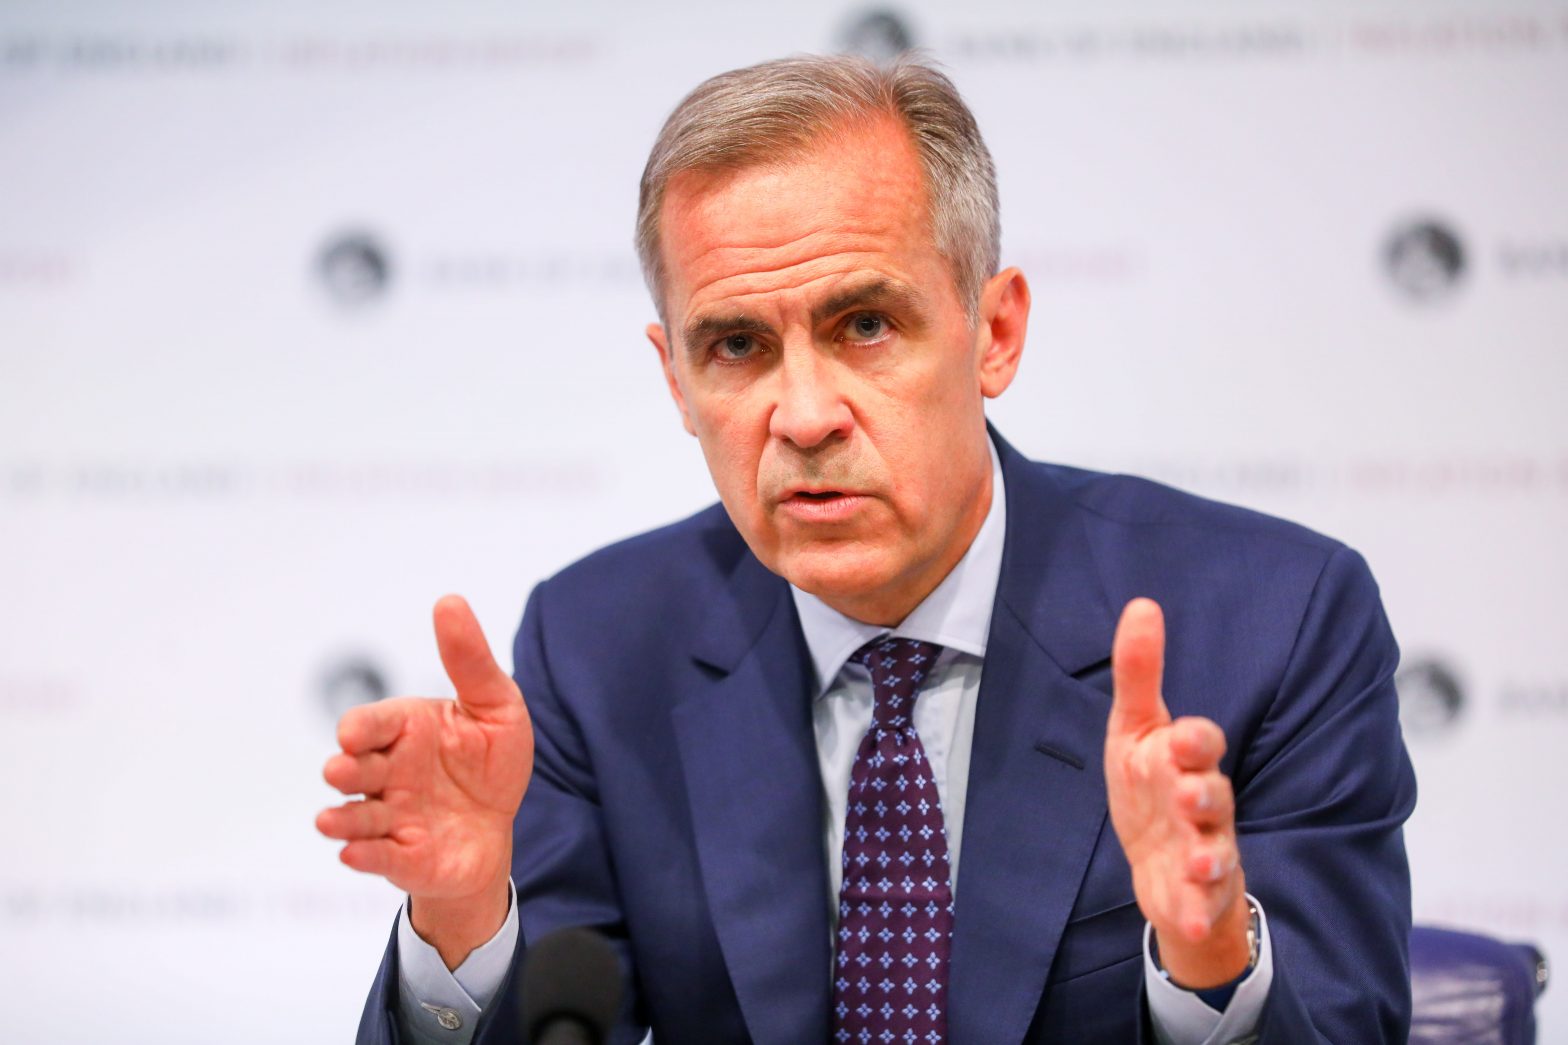 Bank of England cuts rates in emergency move to counter coronavirus impact – CNBC